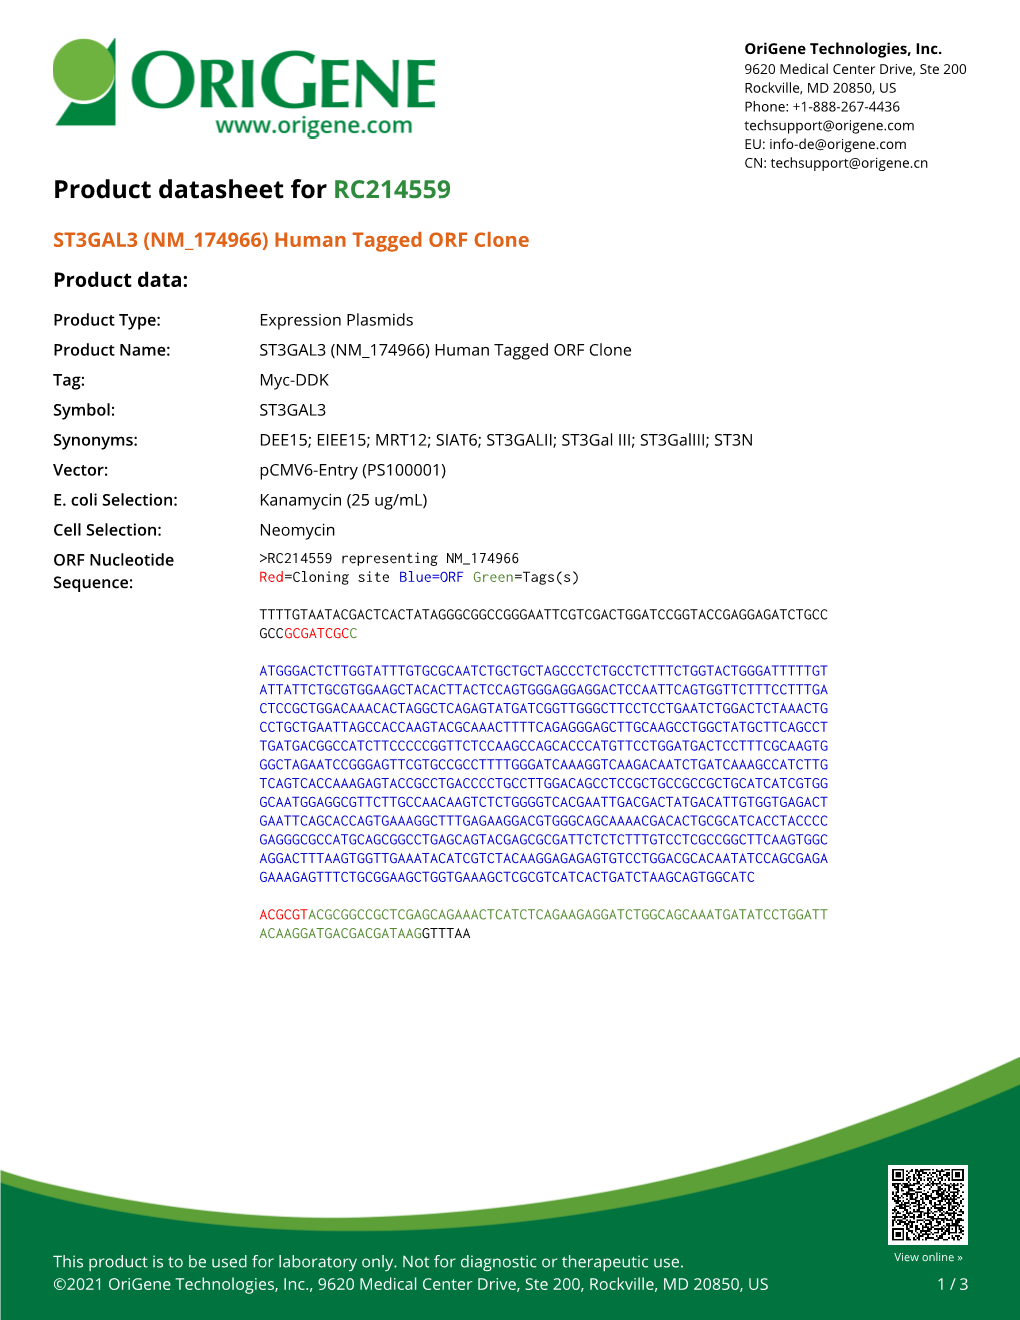 ST3GAL3 (NM 174966) Human Tagged ORF Clone Product Data